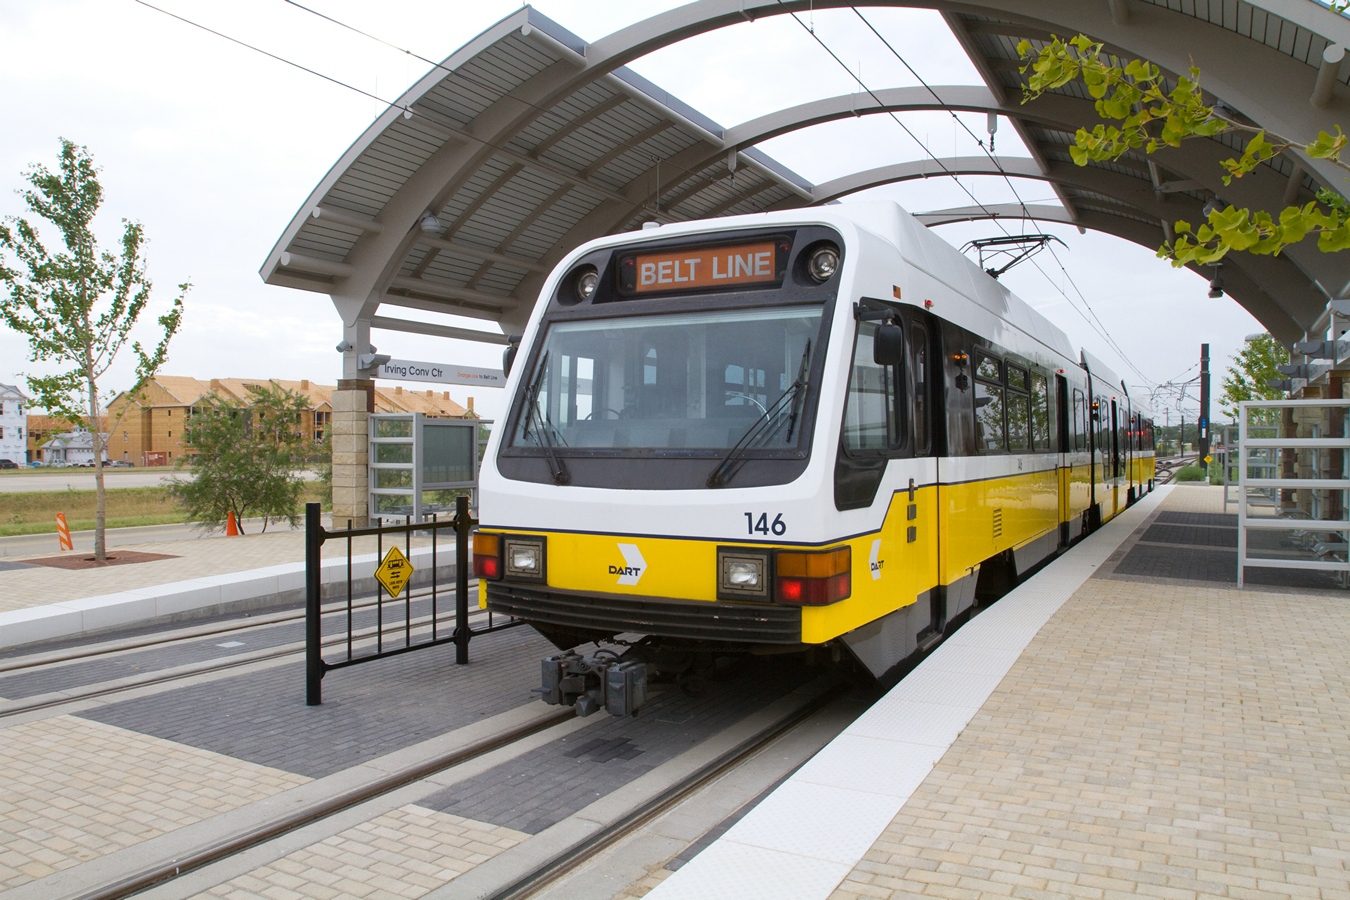 DART announced it is returning $214 million in taxpayer money back to Dallas and other North Texas cities it services to fund transportation projects.